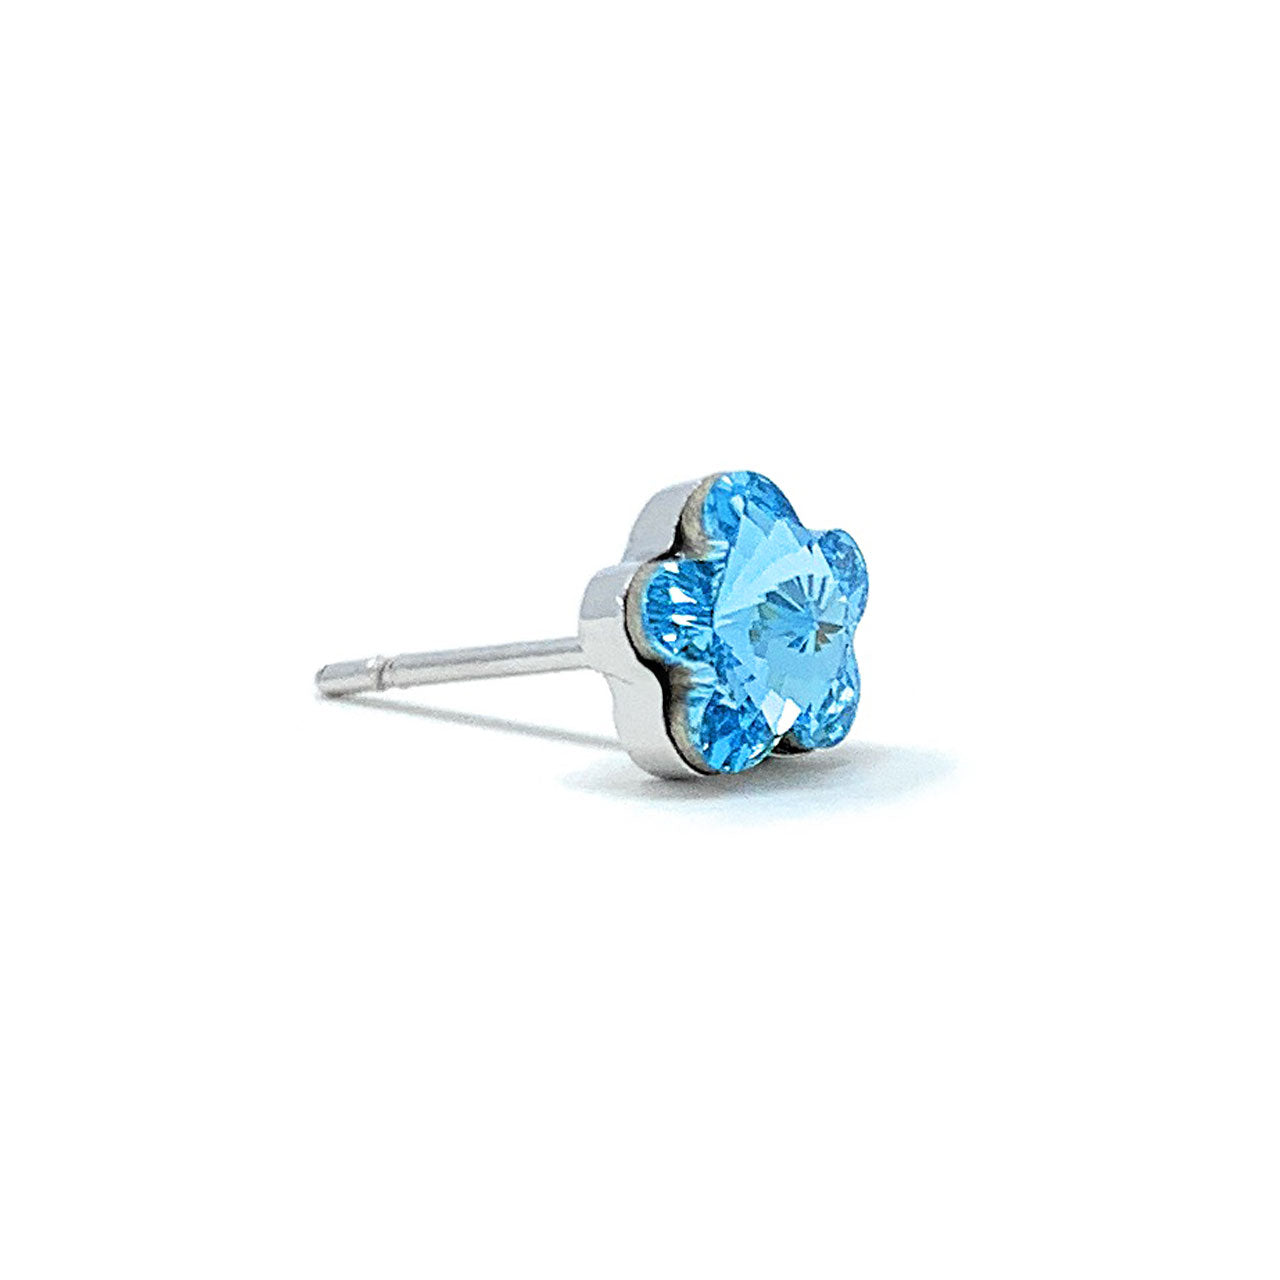 Anna Small Stud Earrings with Blue Aquamarine Flower Crystals from Swarovski Silver Toned Rhodium Plated - Ed Heart